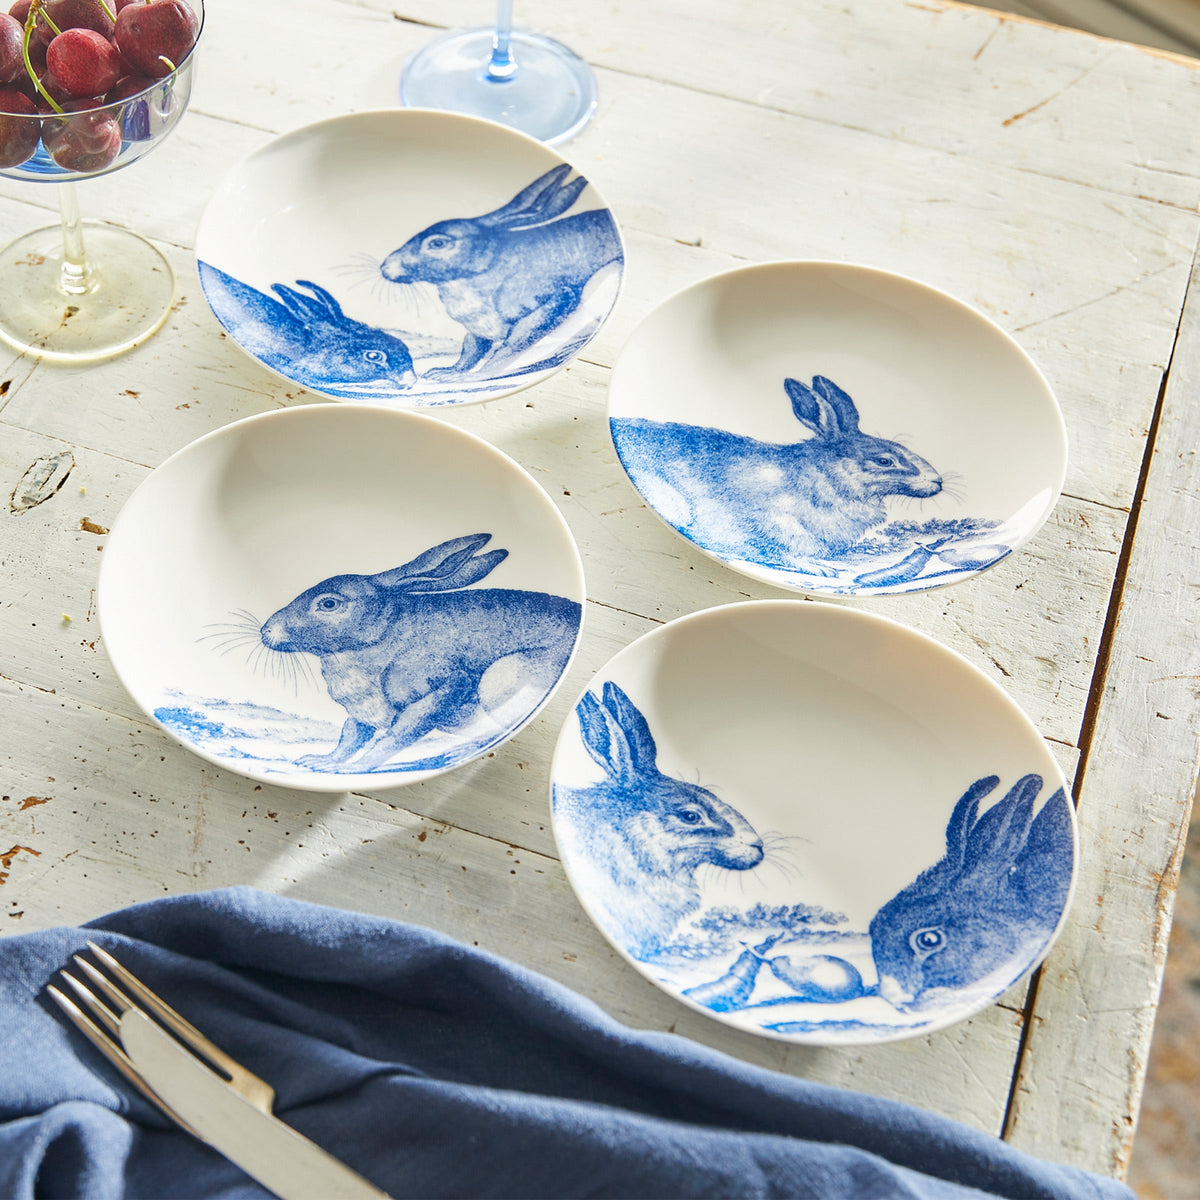 Four Bunnies Small Plates made of high-fired porcelain with blue drawings of rabbits from Caskata Artisanal Home are arranged on a distressed white wooden table. A glass of red grapes, a fork, a knife, and a blue cloth are also on the table.